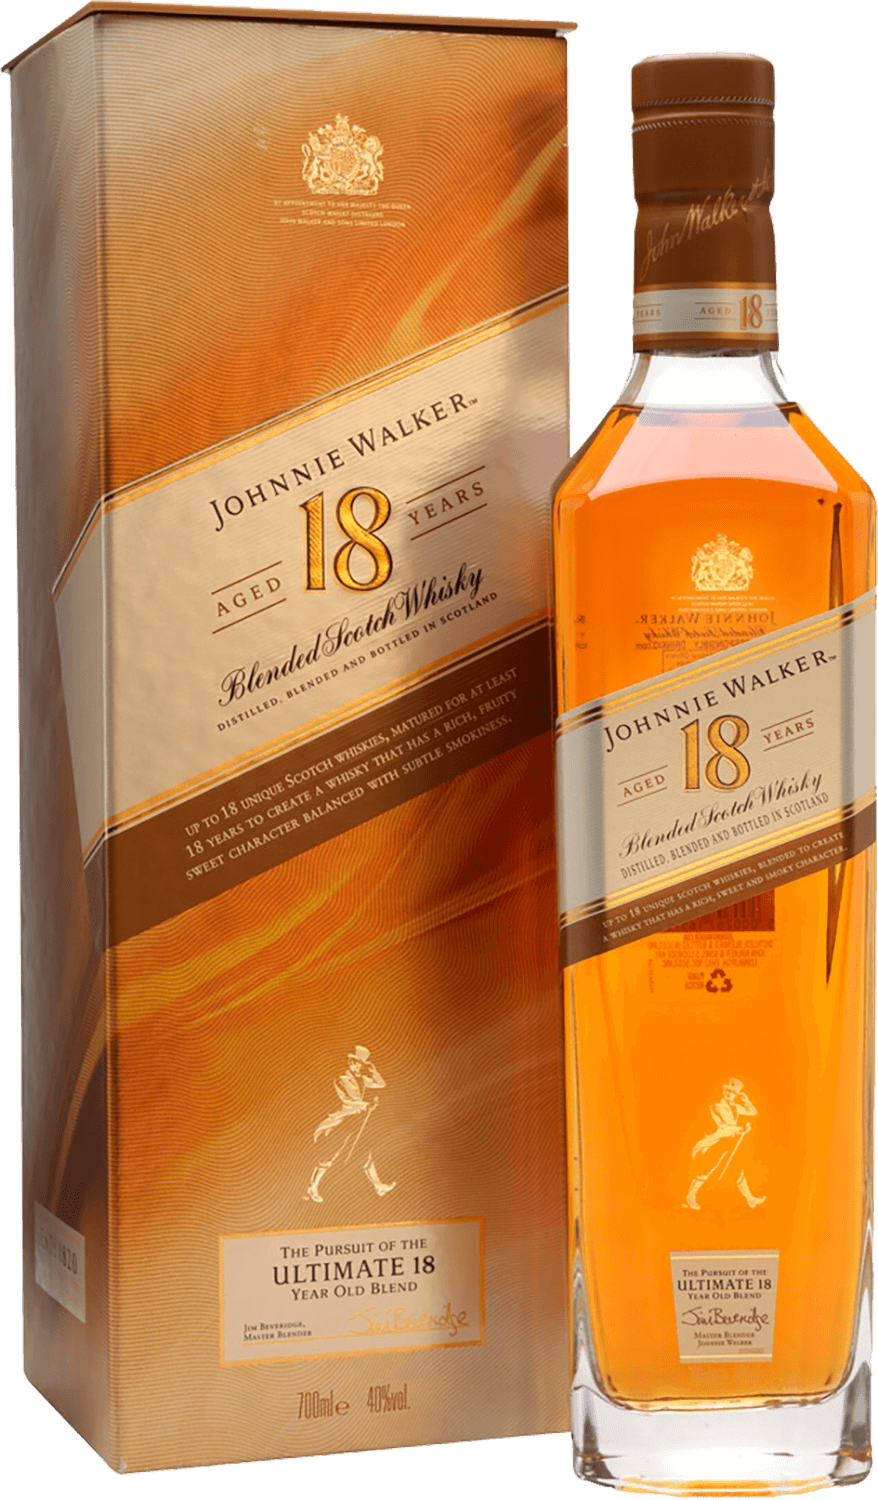 Johnnie Walker 18 y.o. Blended Scotch Whisky (gift box) johnnie walker red label blended scotch whisky gift box